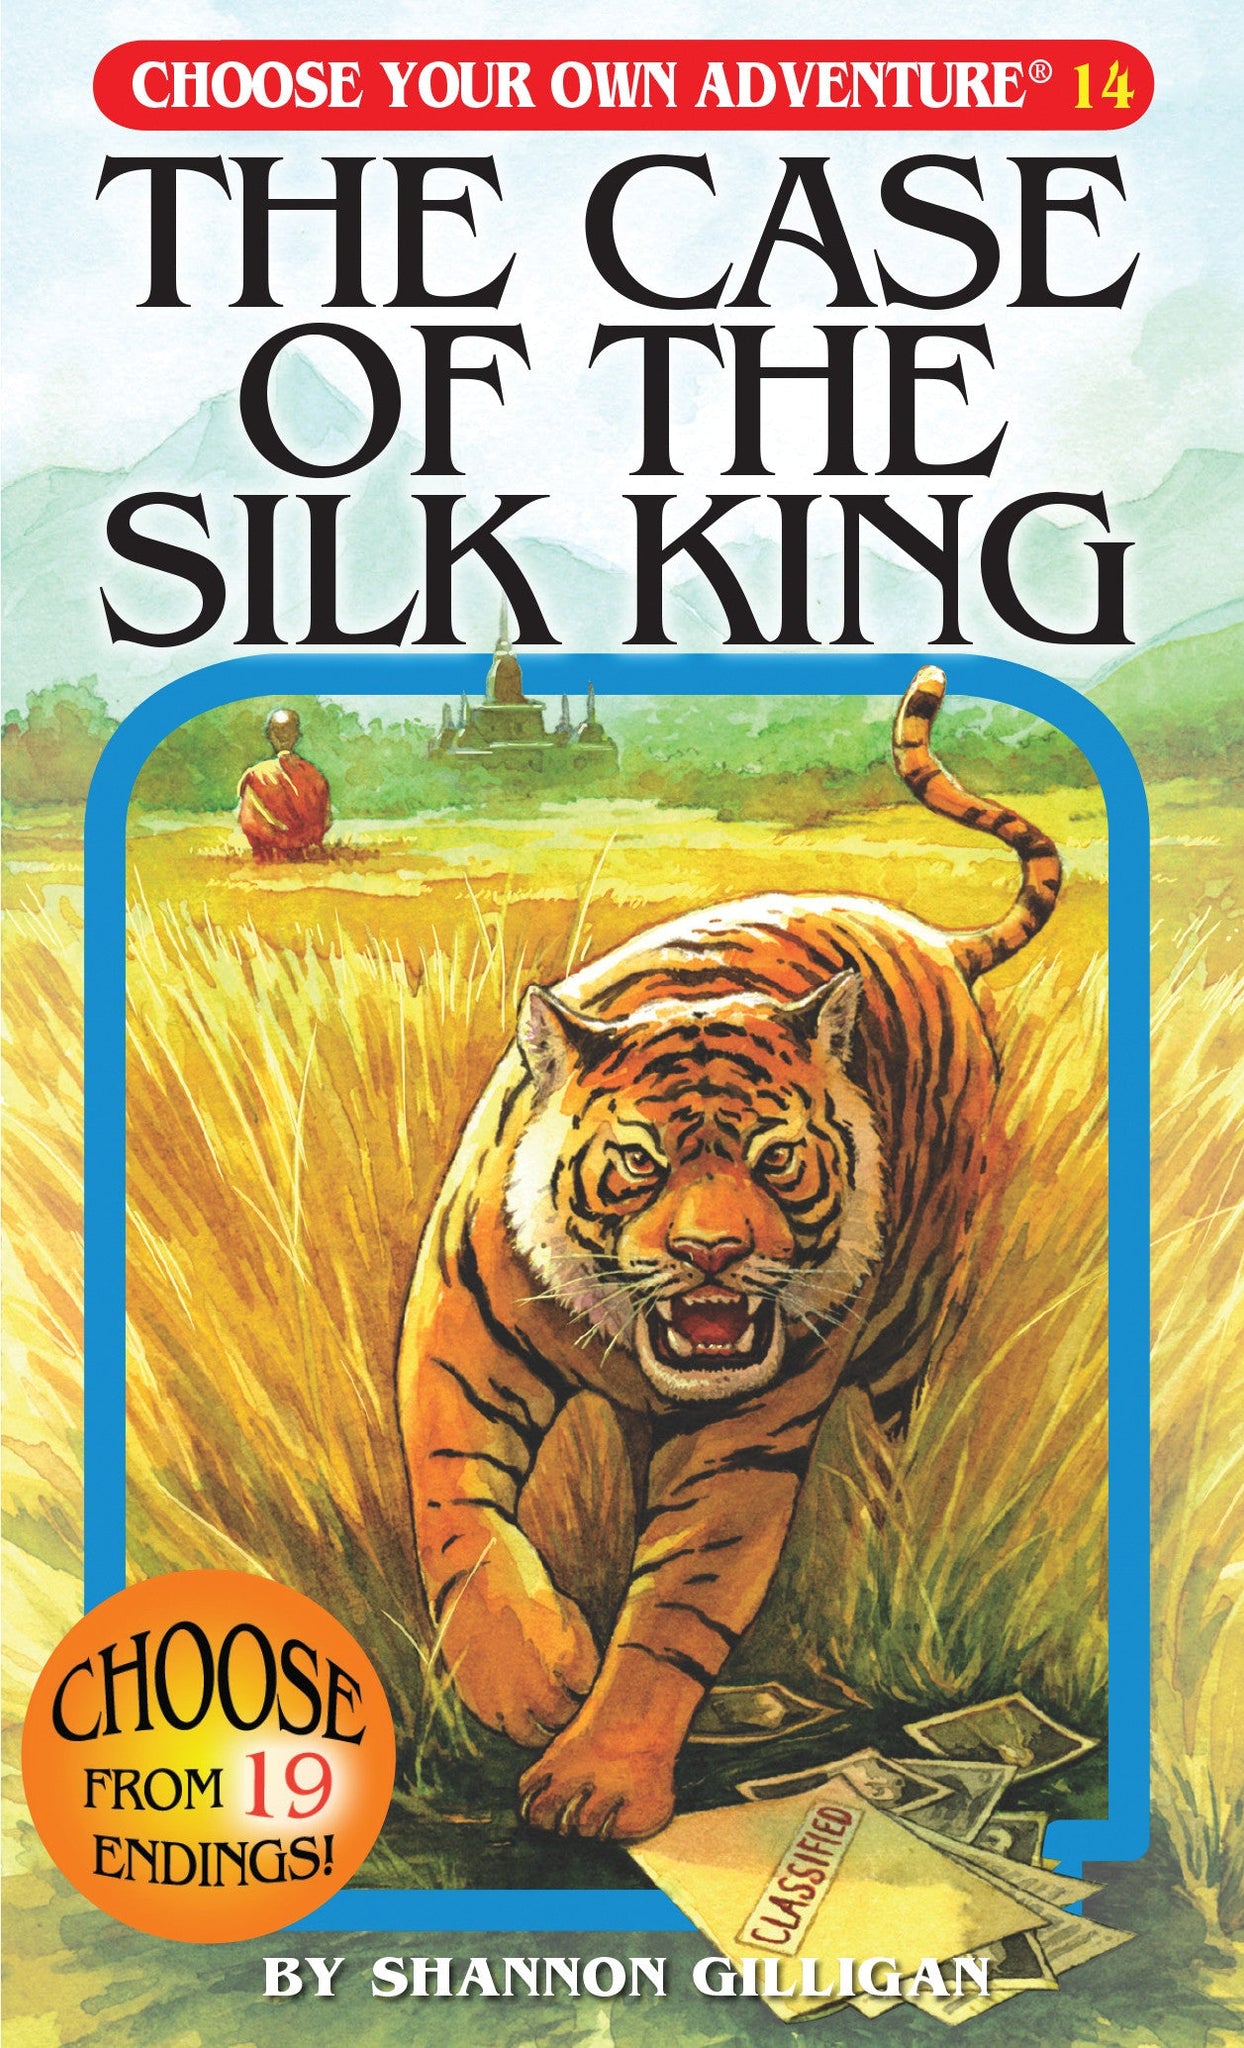 The Case Of The Silk King (Choose Your Own Adventure book 14)